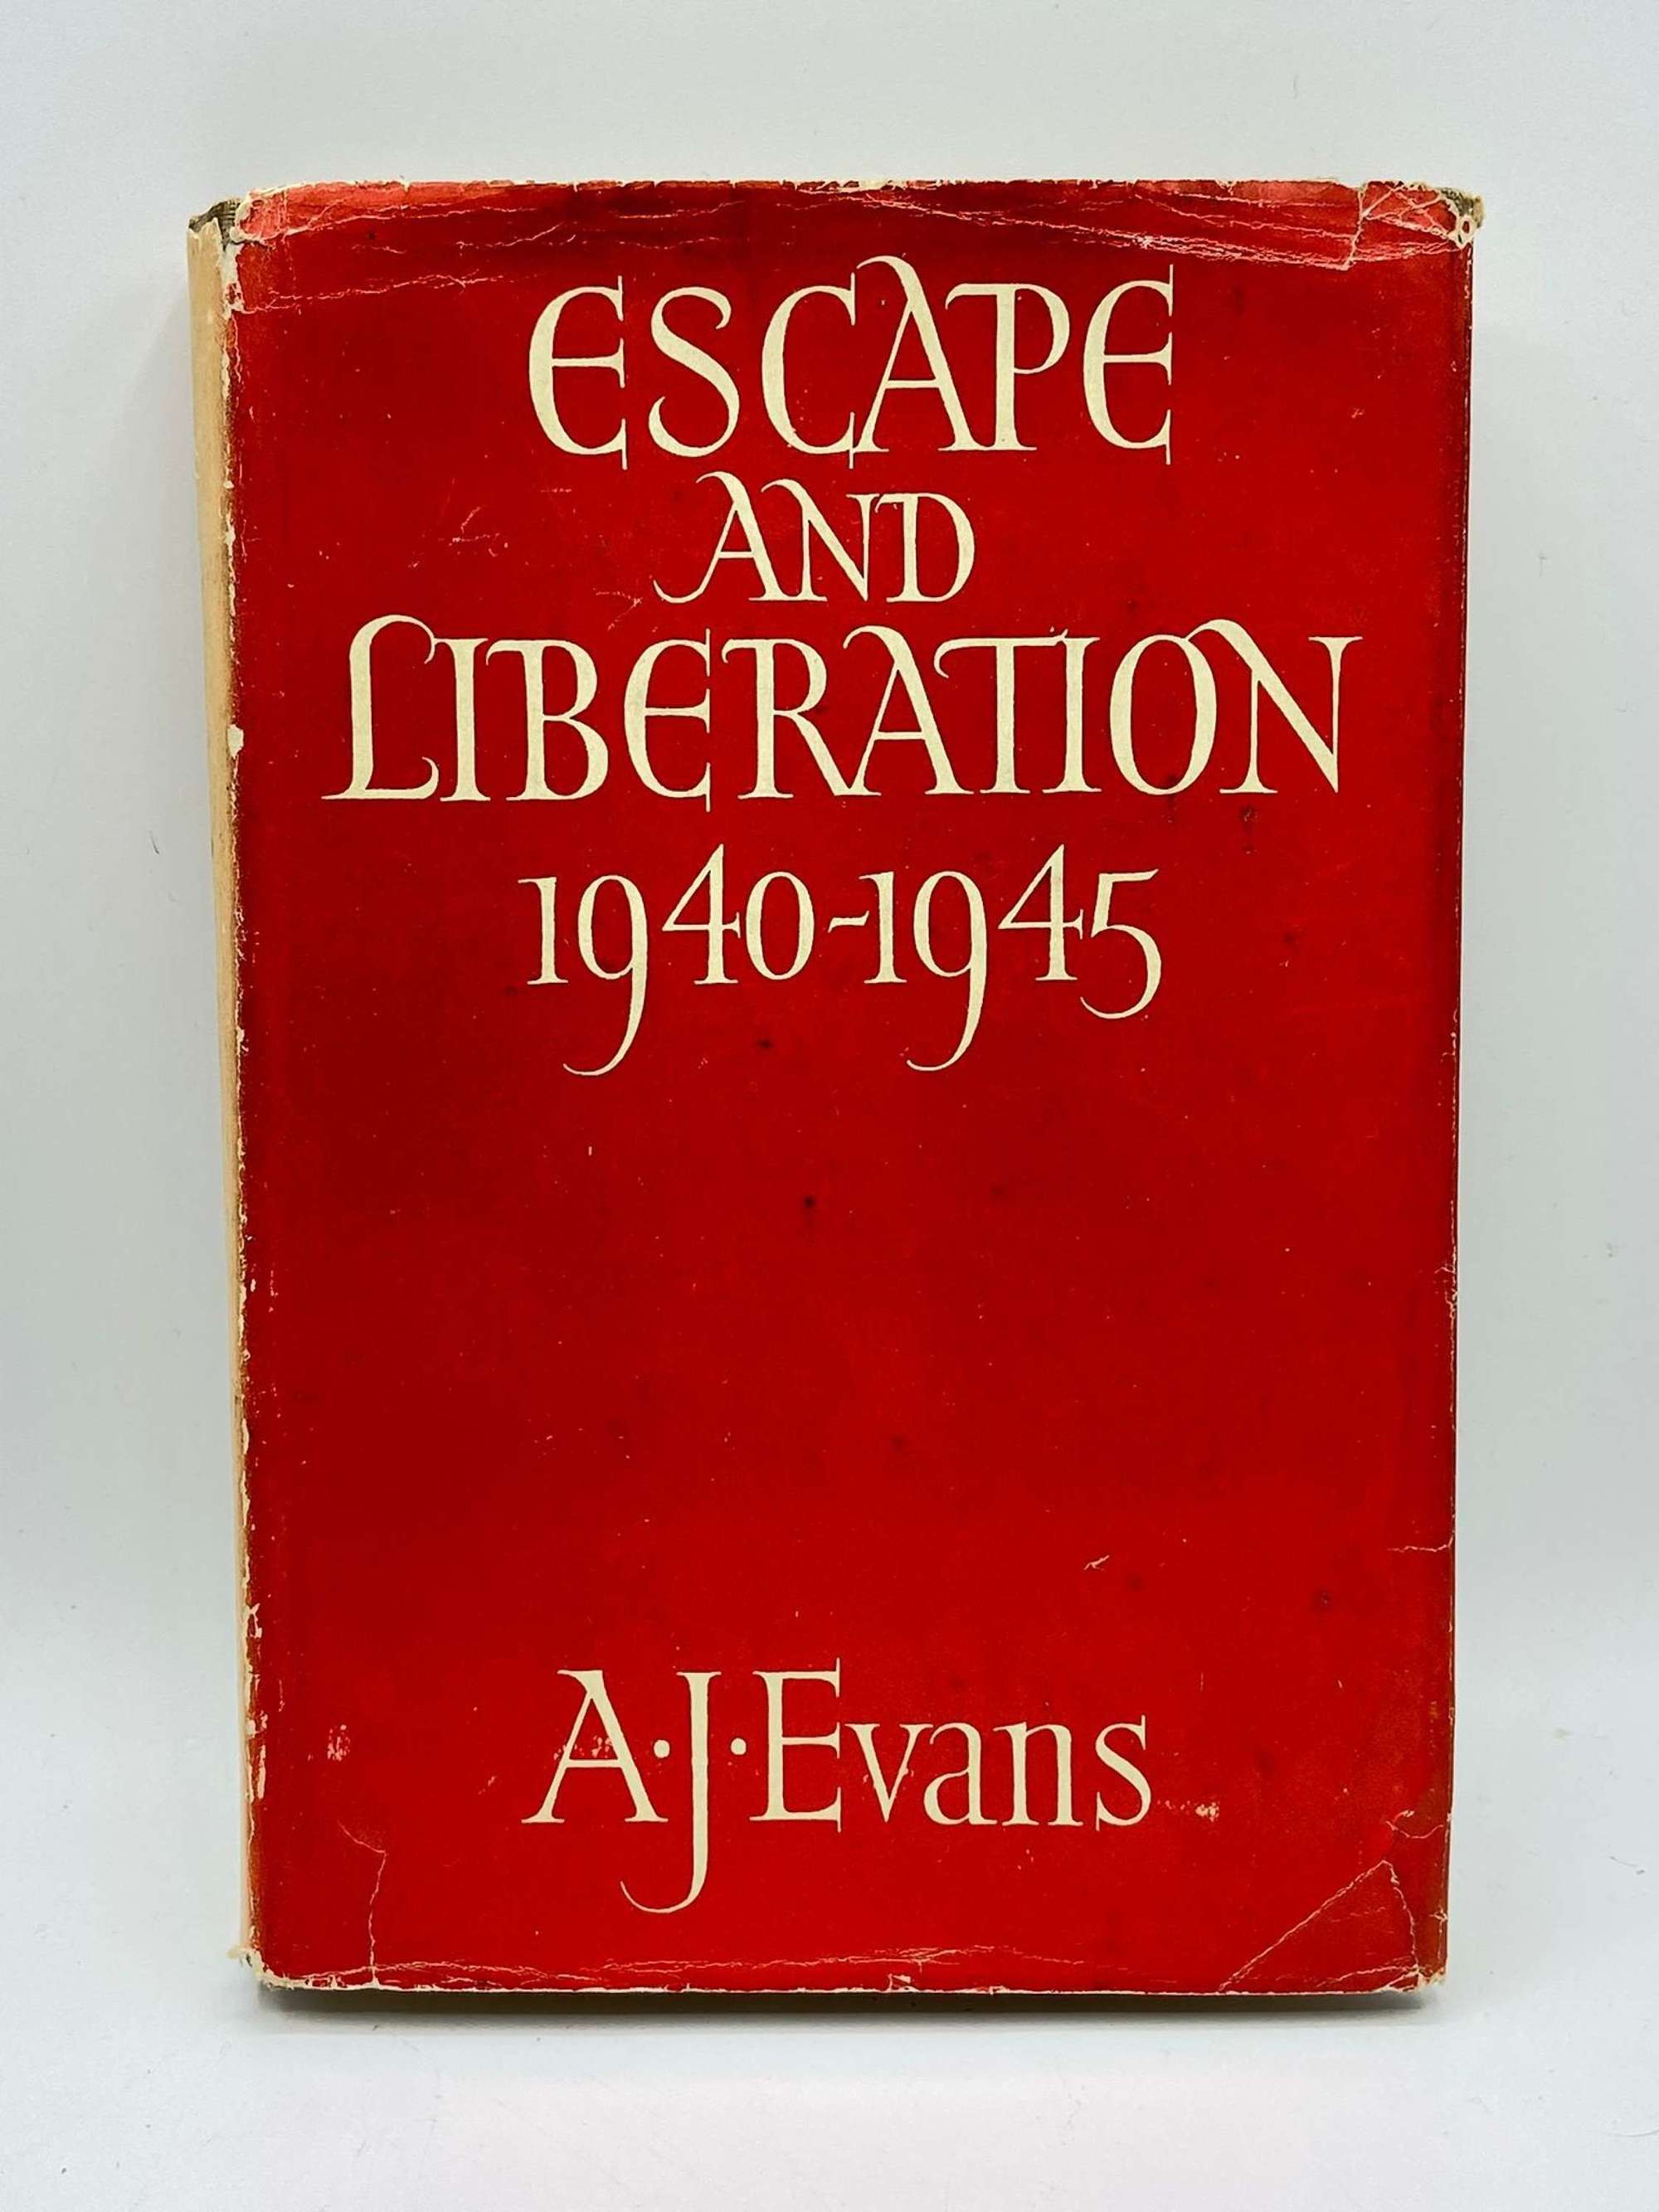 WW2 1st Edition Book: Escape And Liberation 1940-45 By A J Evans